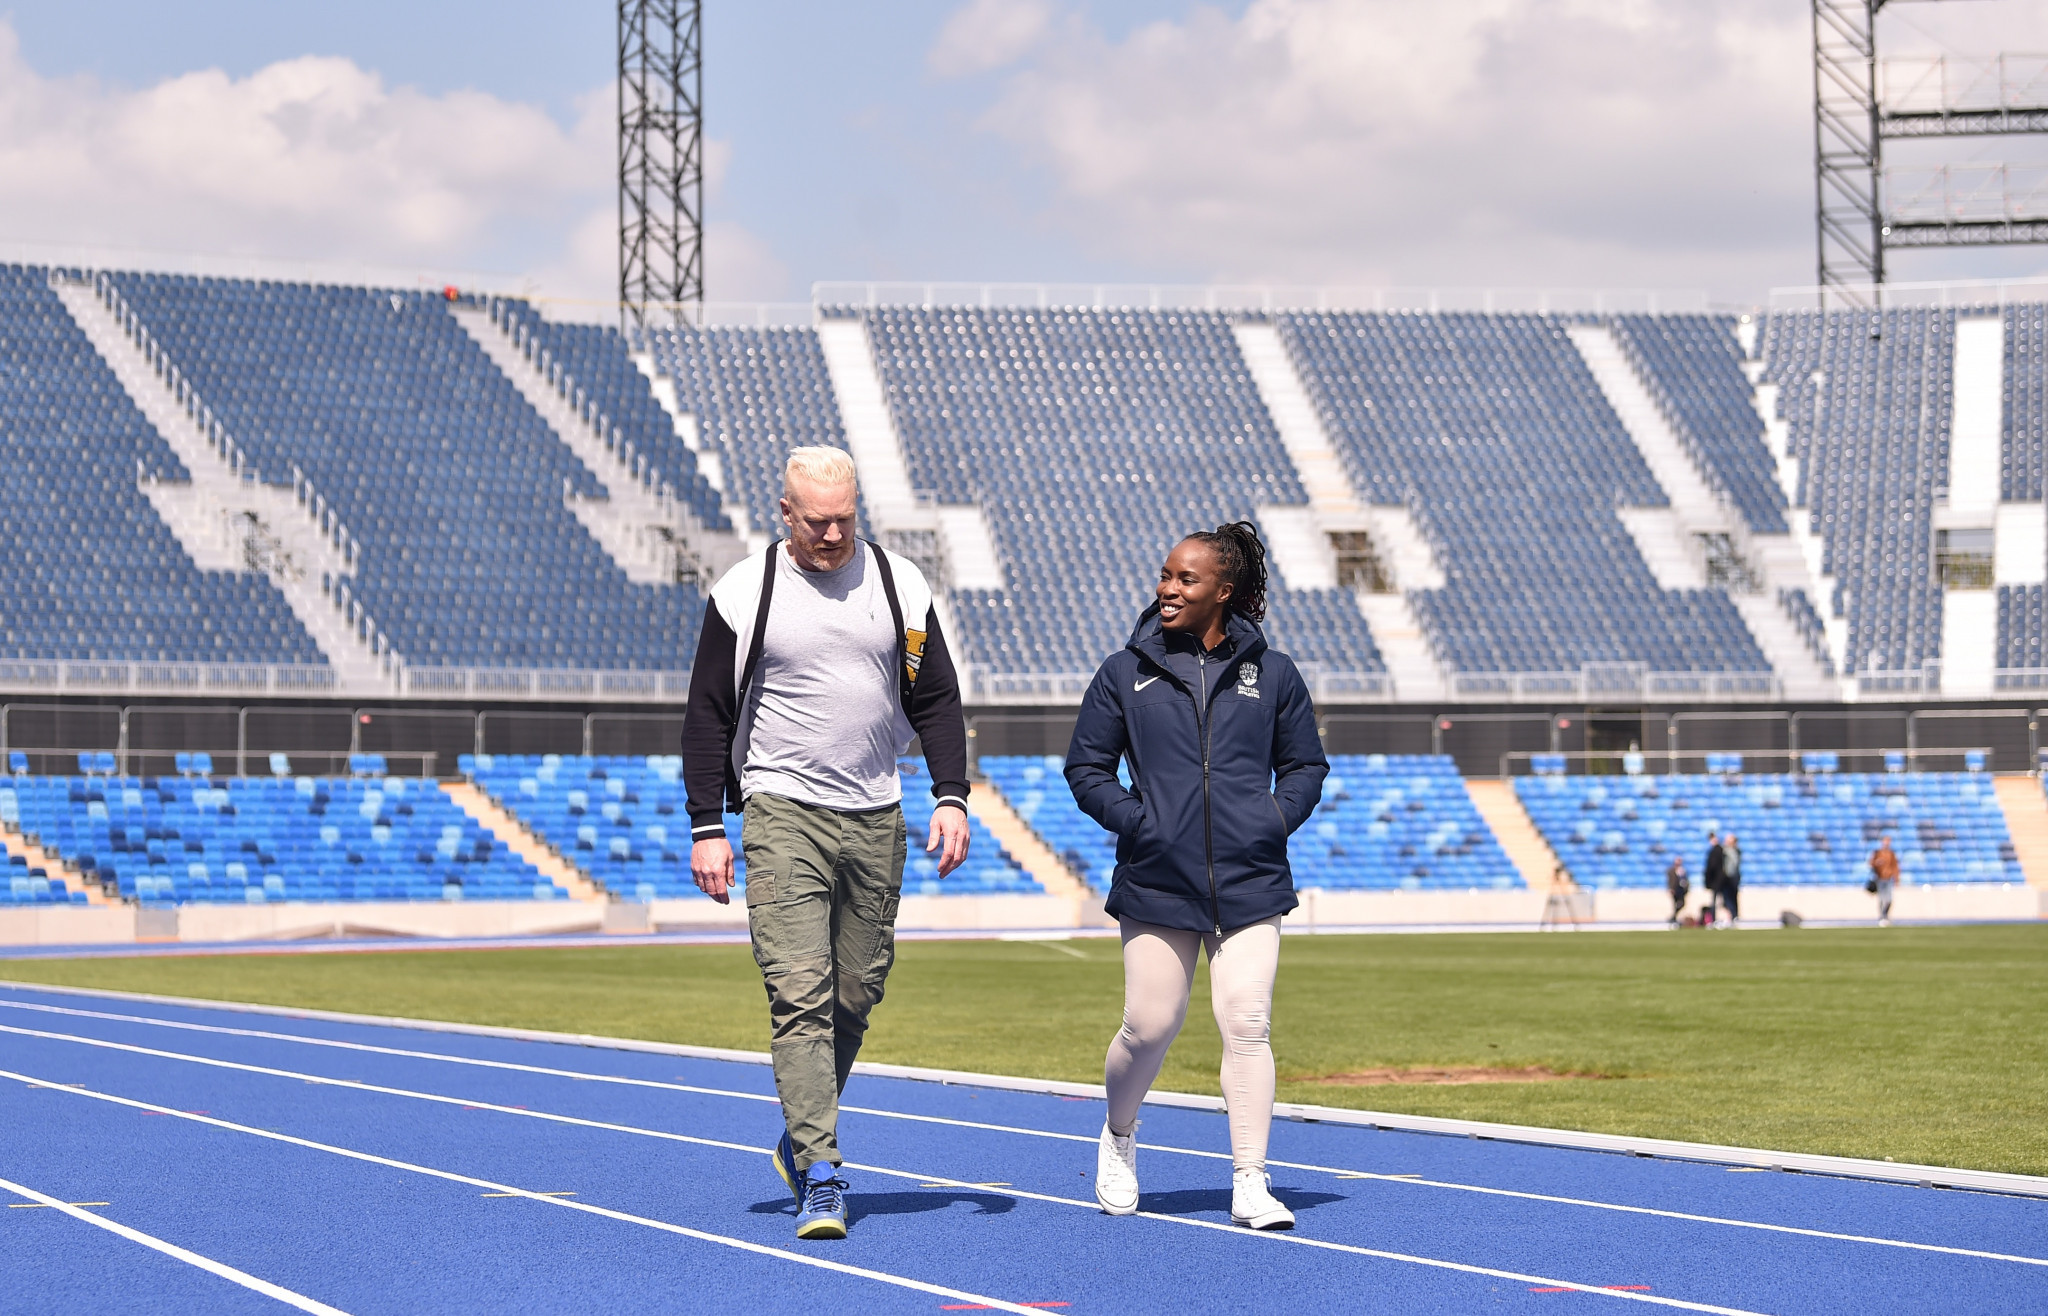 British Olympic medallists Iwan Thomas and Marilyn Okoro were given a tour of the Alexander Stadium ©British Athletics and Getty Images